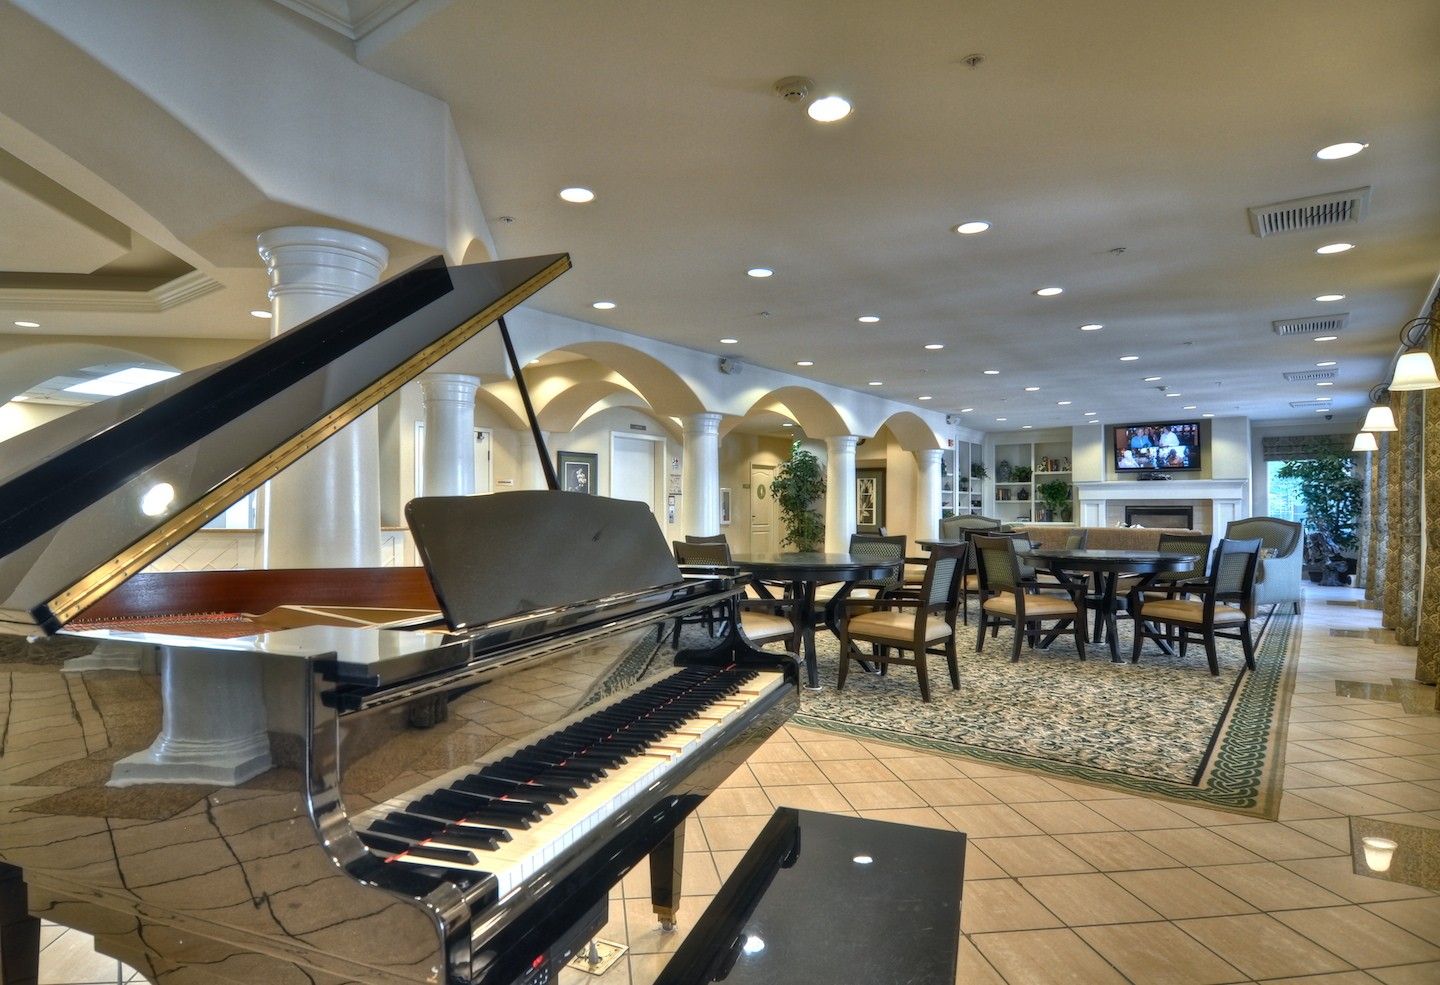 Interior view of Ivy Park at Mission Viejo senior living community featuring a grand piano and modern decor.